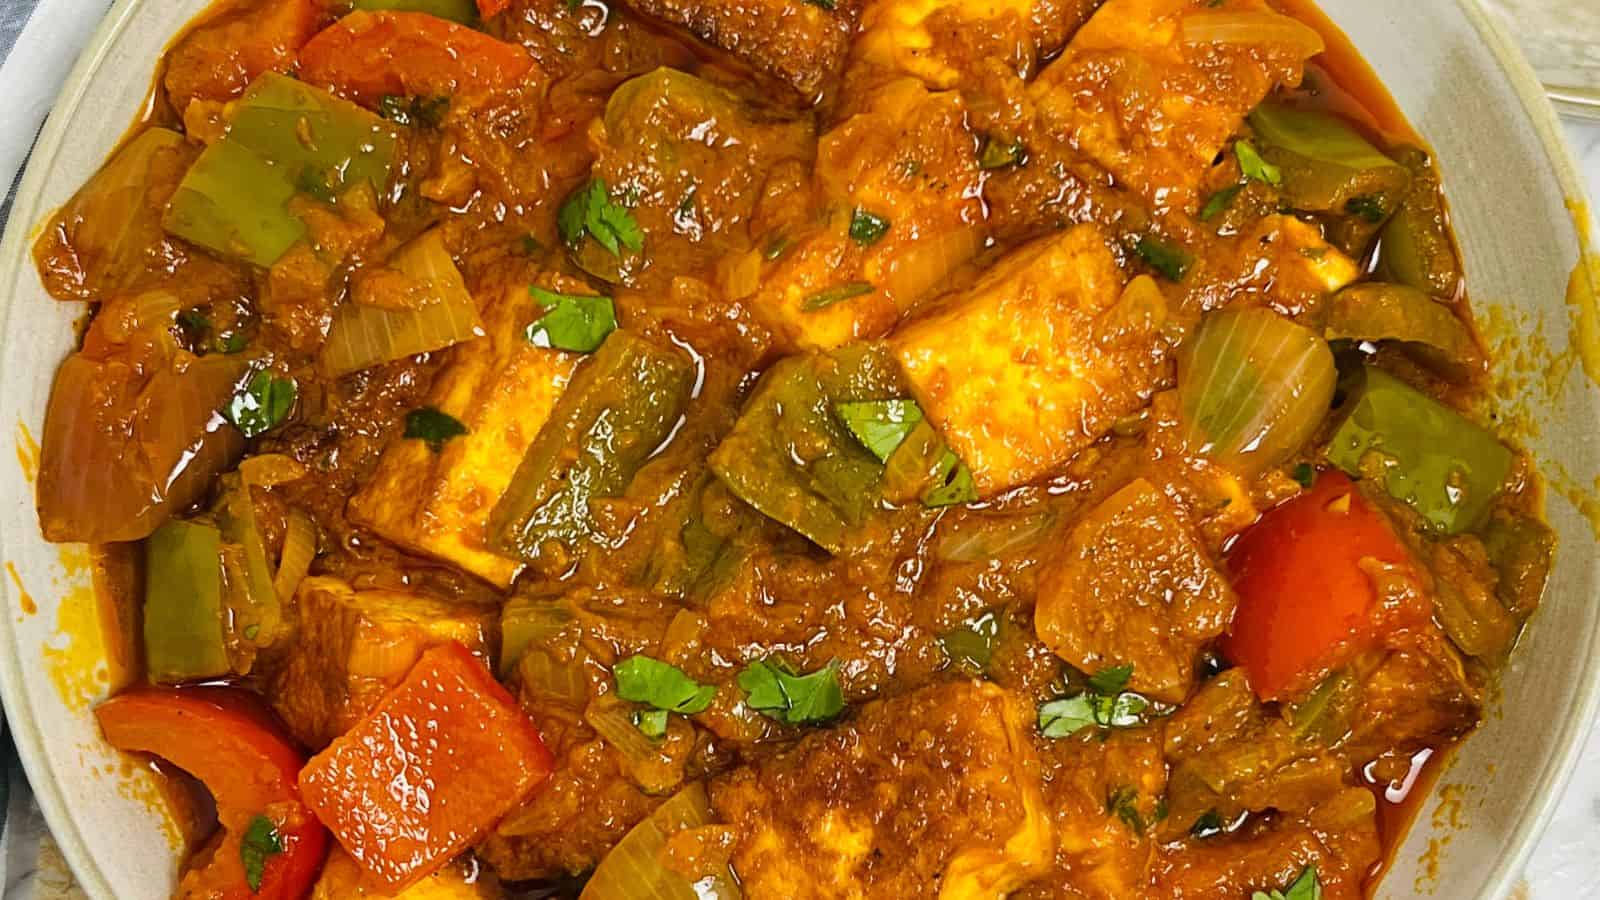 A close-up of Paneer Sabzi featuring chunks of paneer with bell peppers in a rich, spicy tomato-based sauce, garnished with herbs.